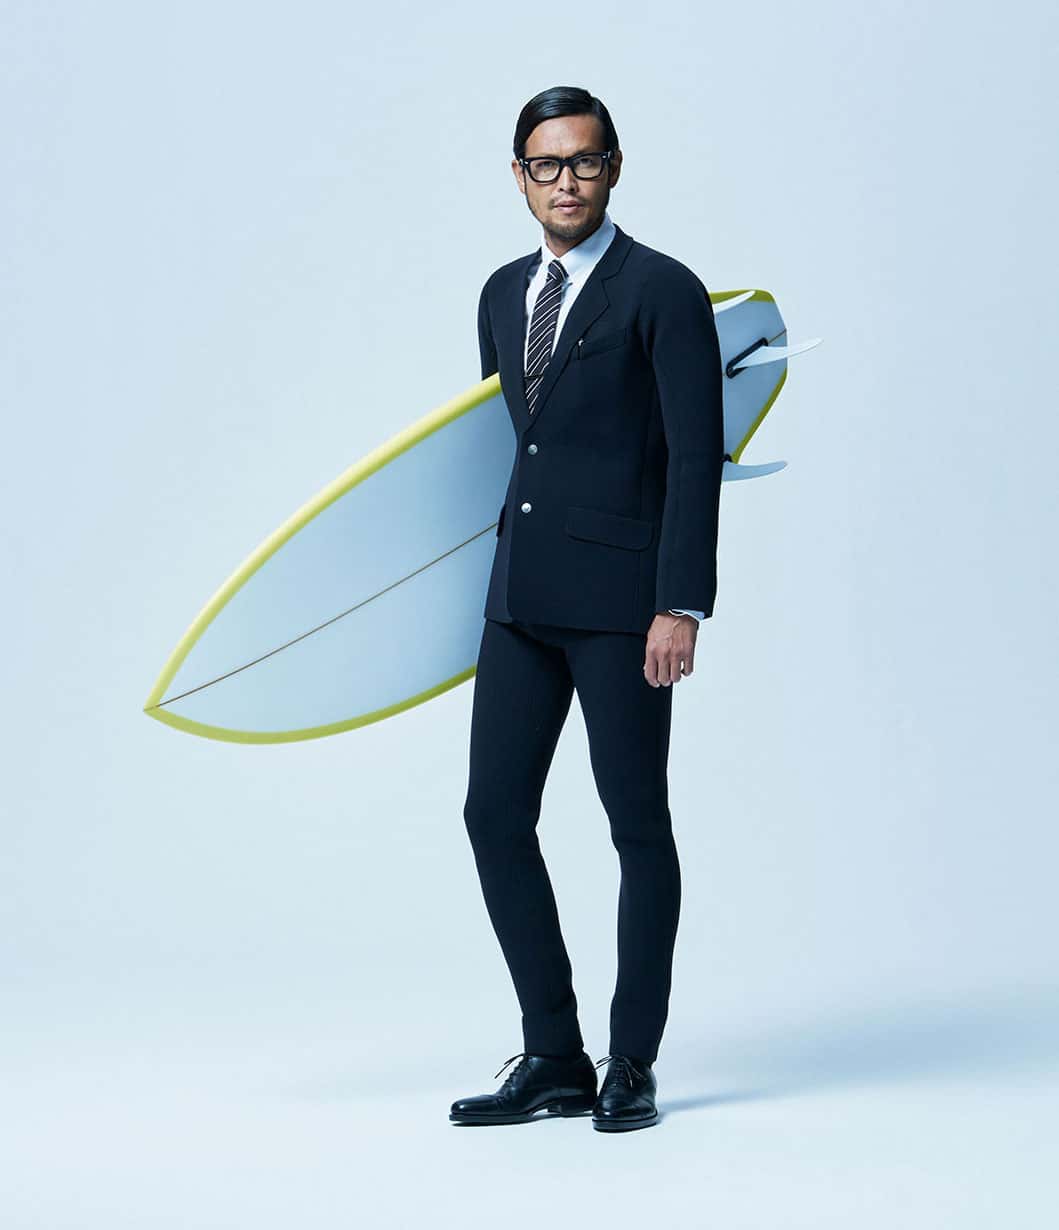 Quiksilver-True-Wetsuit-Cool-Gift-to-Buy-Surfers